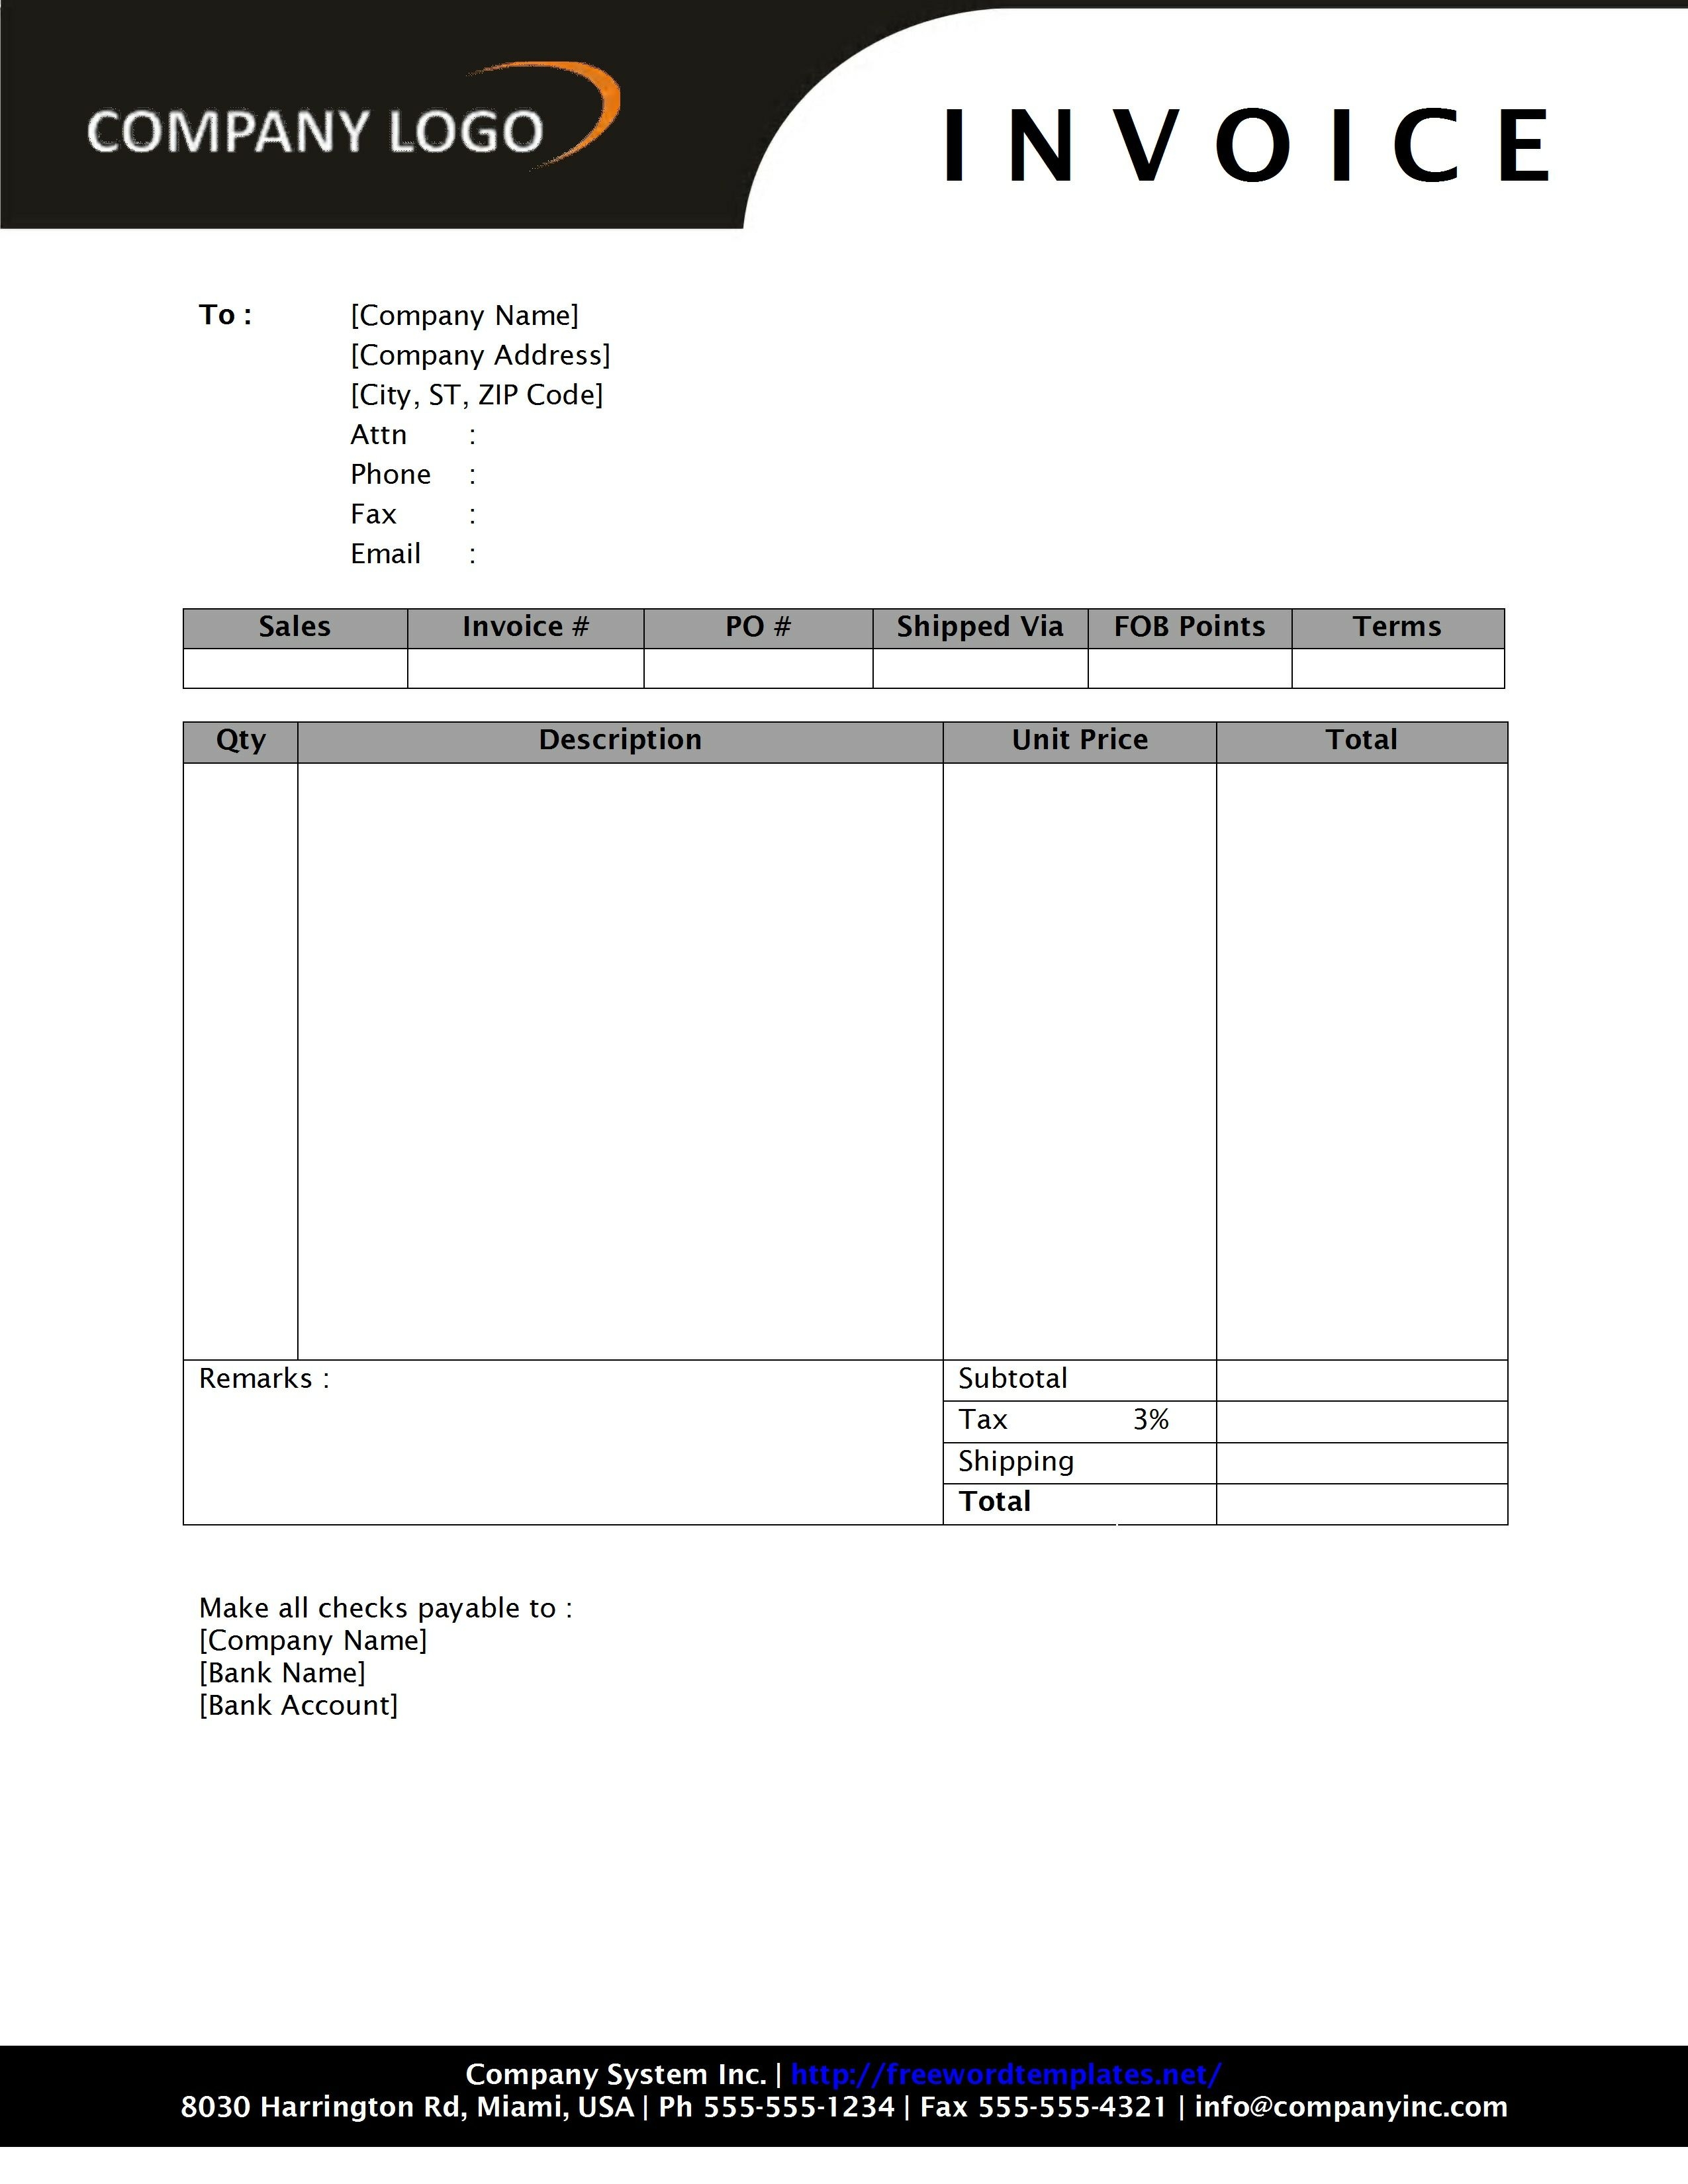 free invoice template in word invoice template for word free basic invoice eobpnzpc ossummit 2550 X 3300